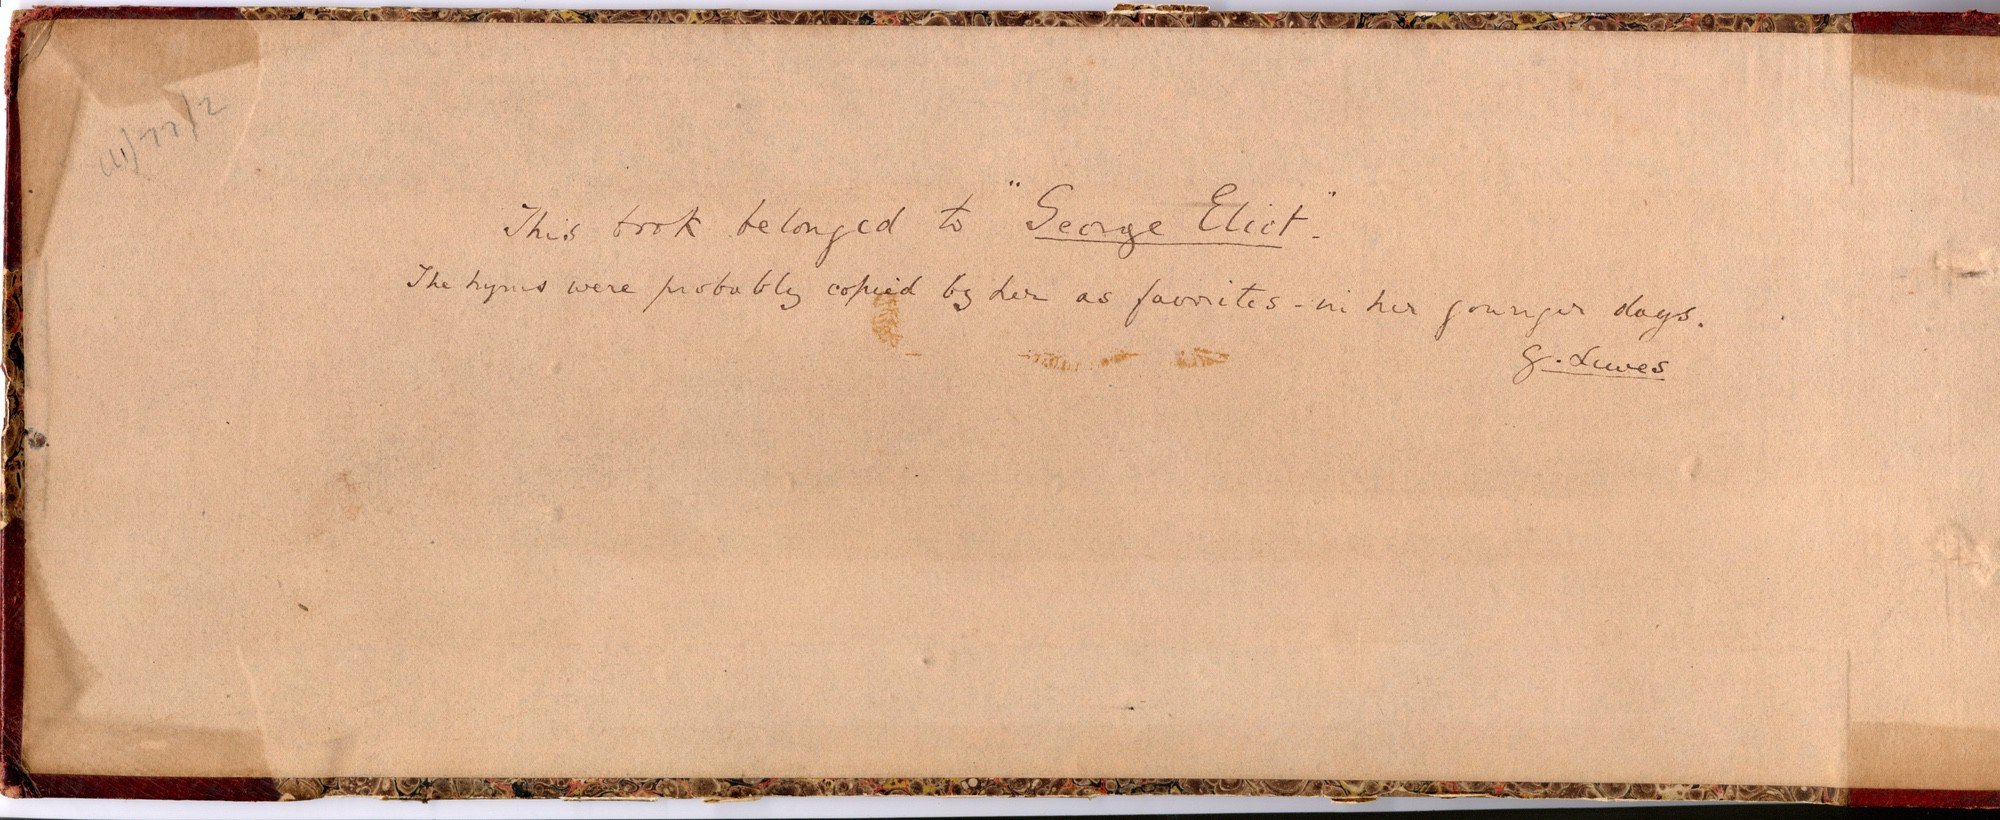 Inner page of a book. Handwritten are the words: This book belonged to George Eliot.